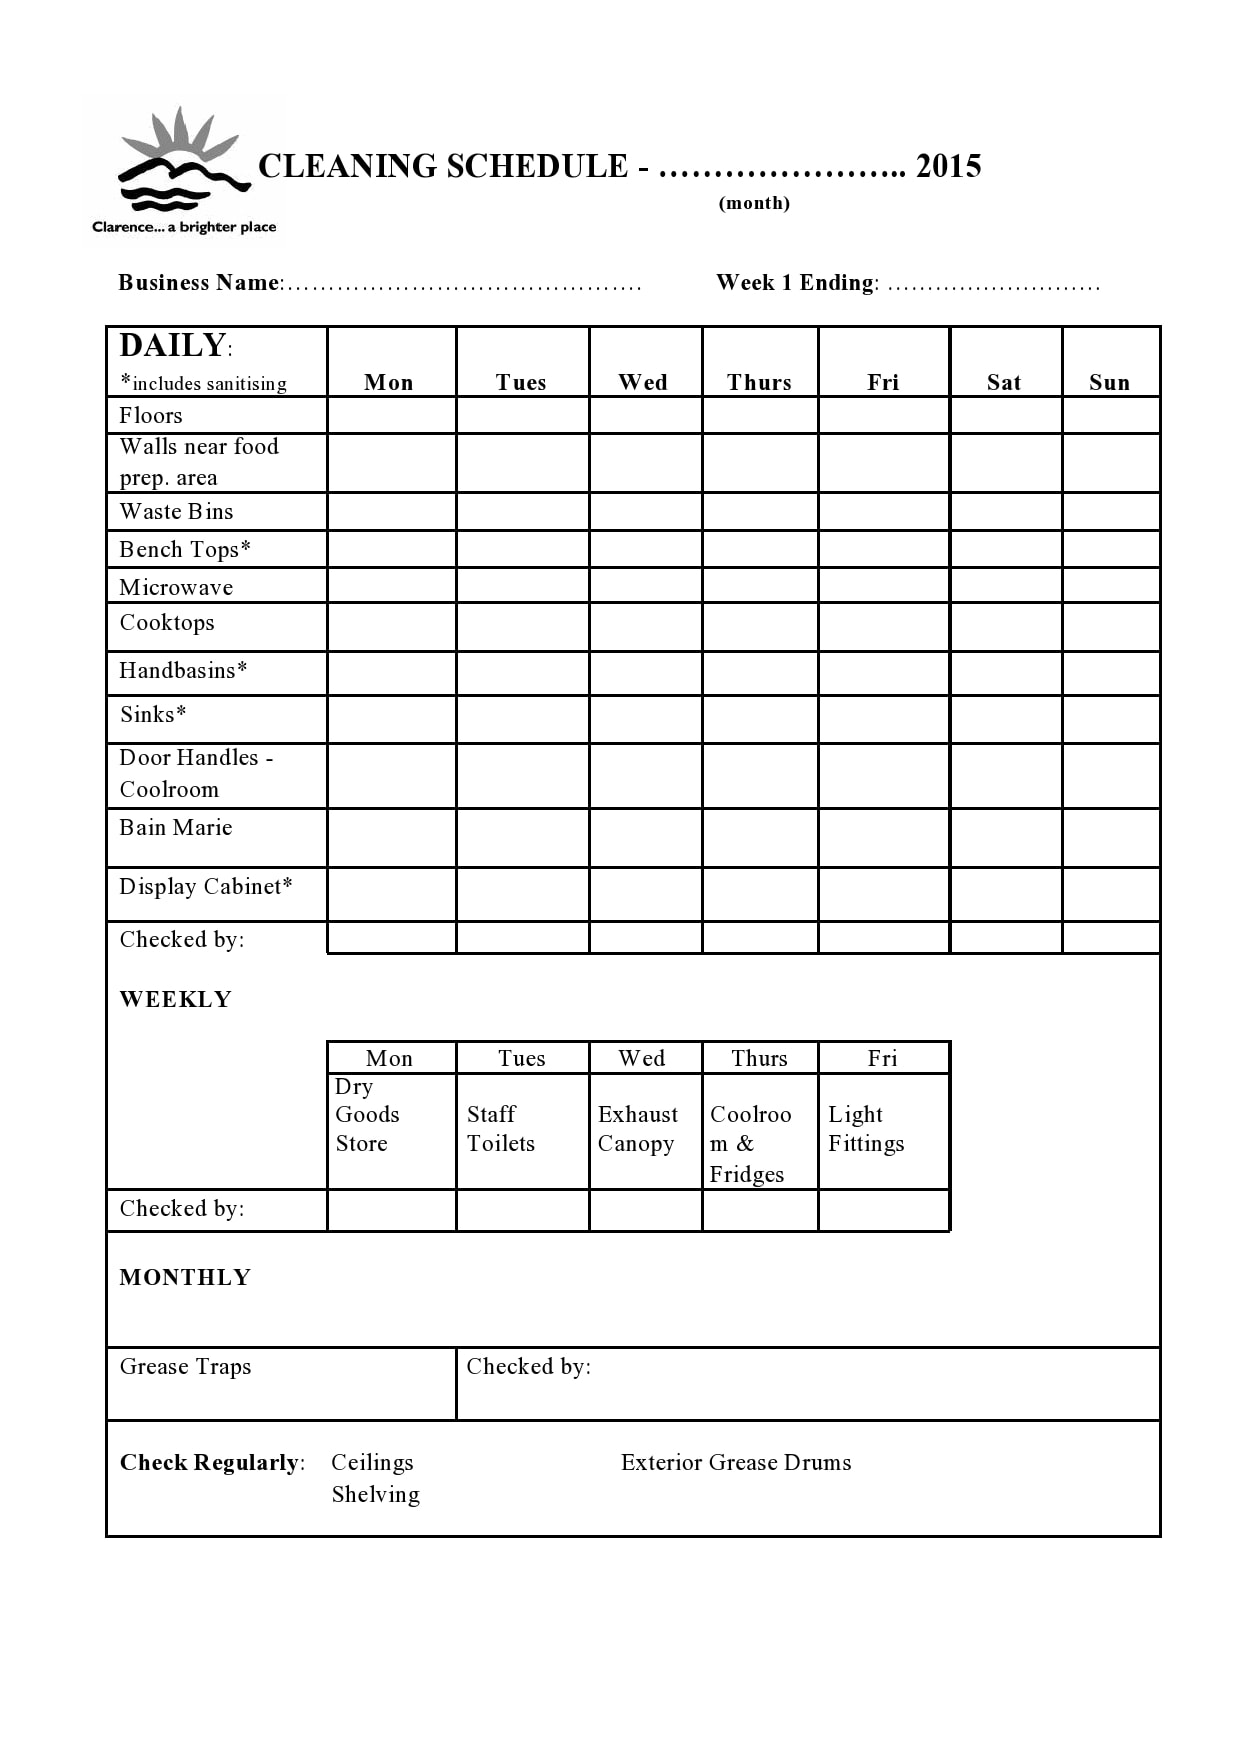 work-cleaning-schedule-template